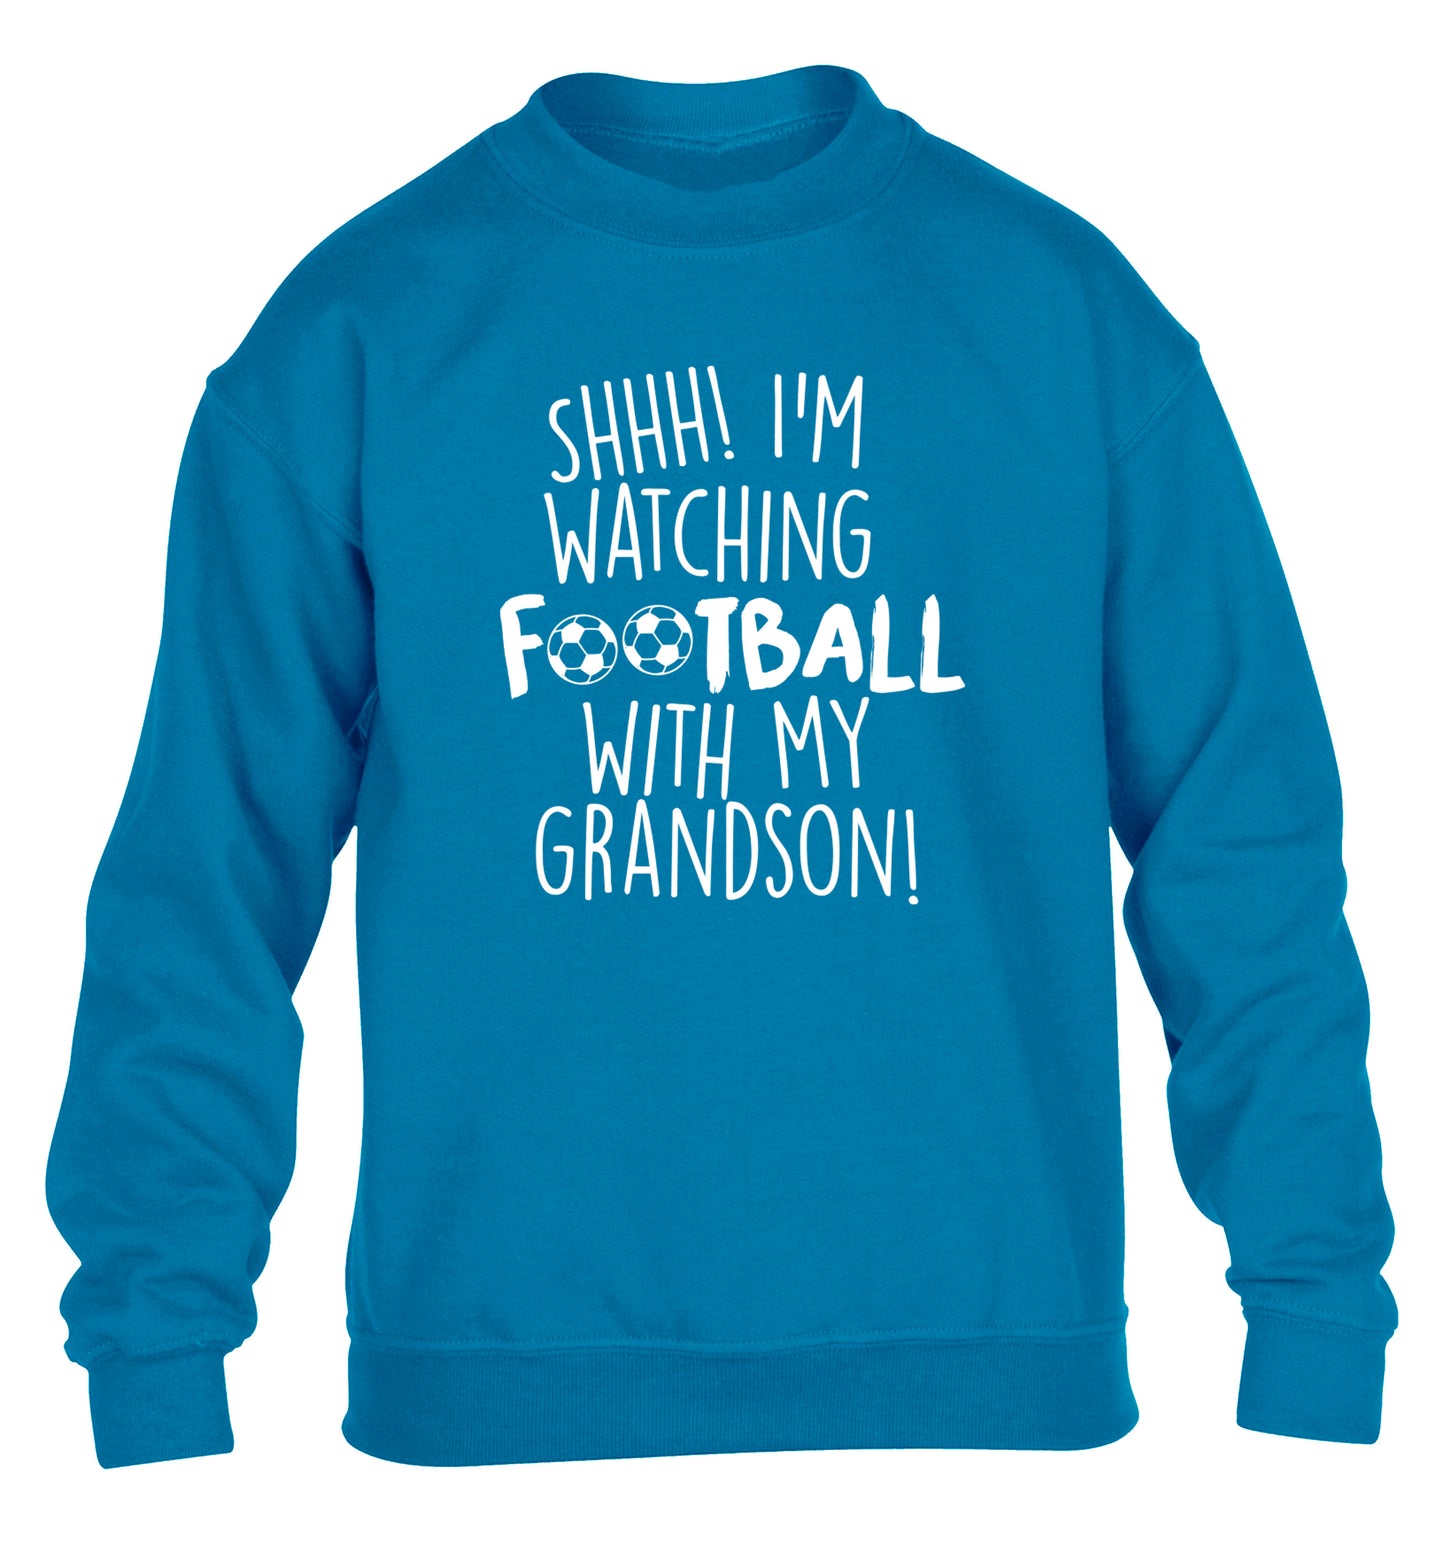 Shhh I'm watching football with my grandson children's blue sweater 12-14 Years